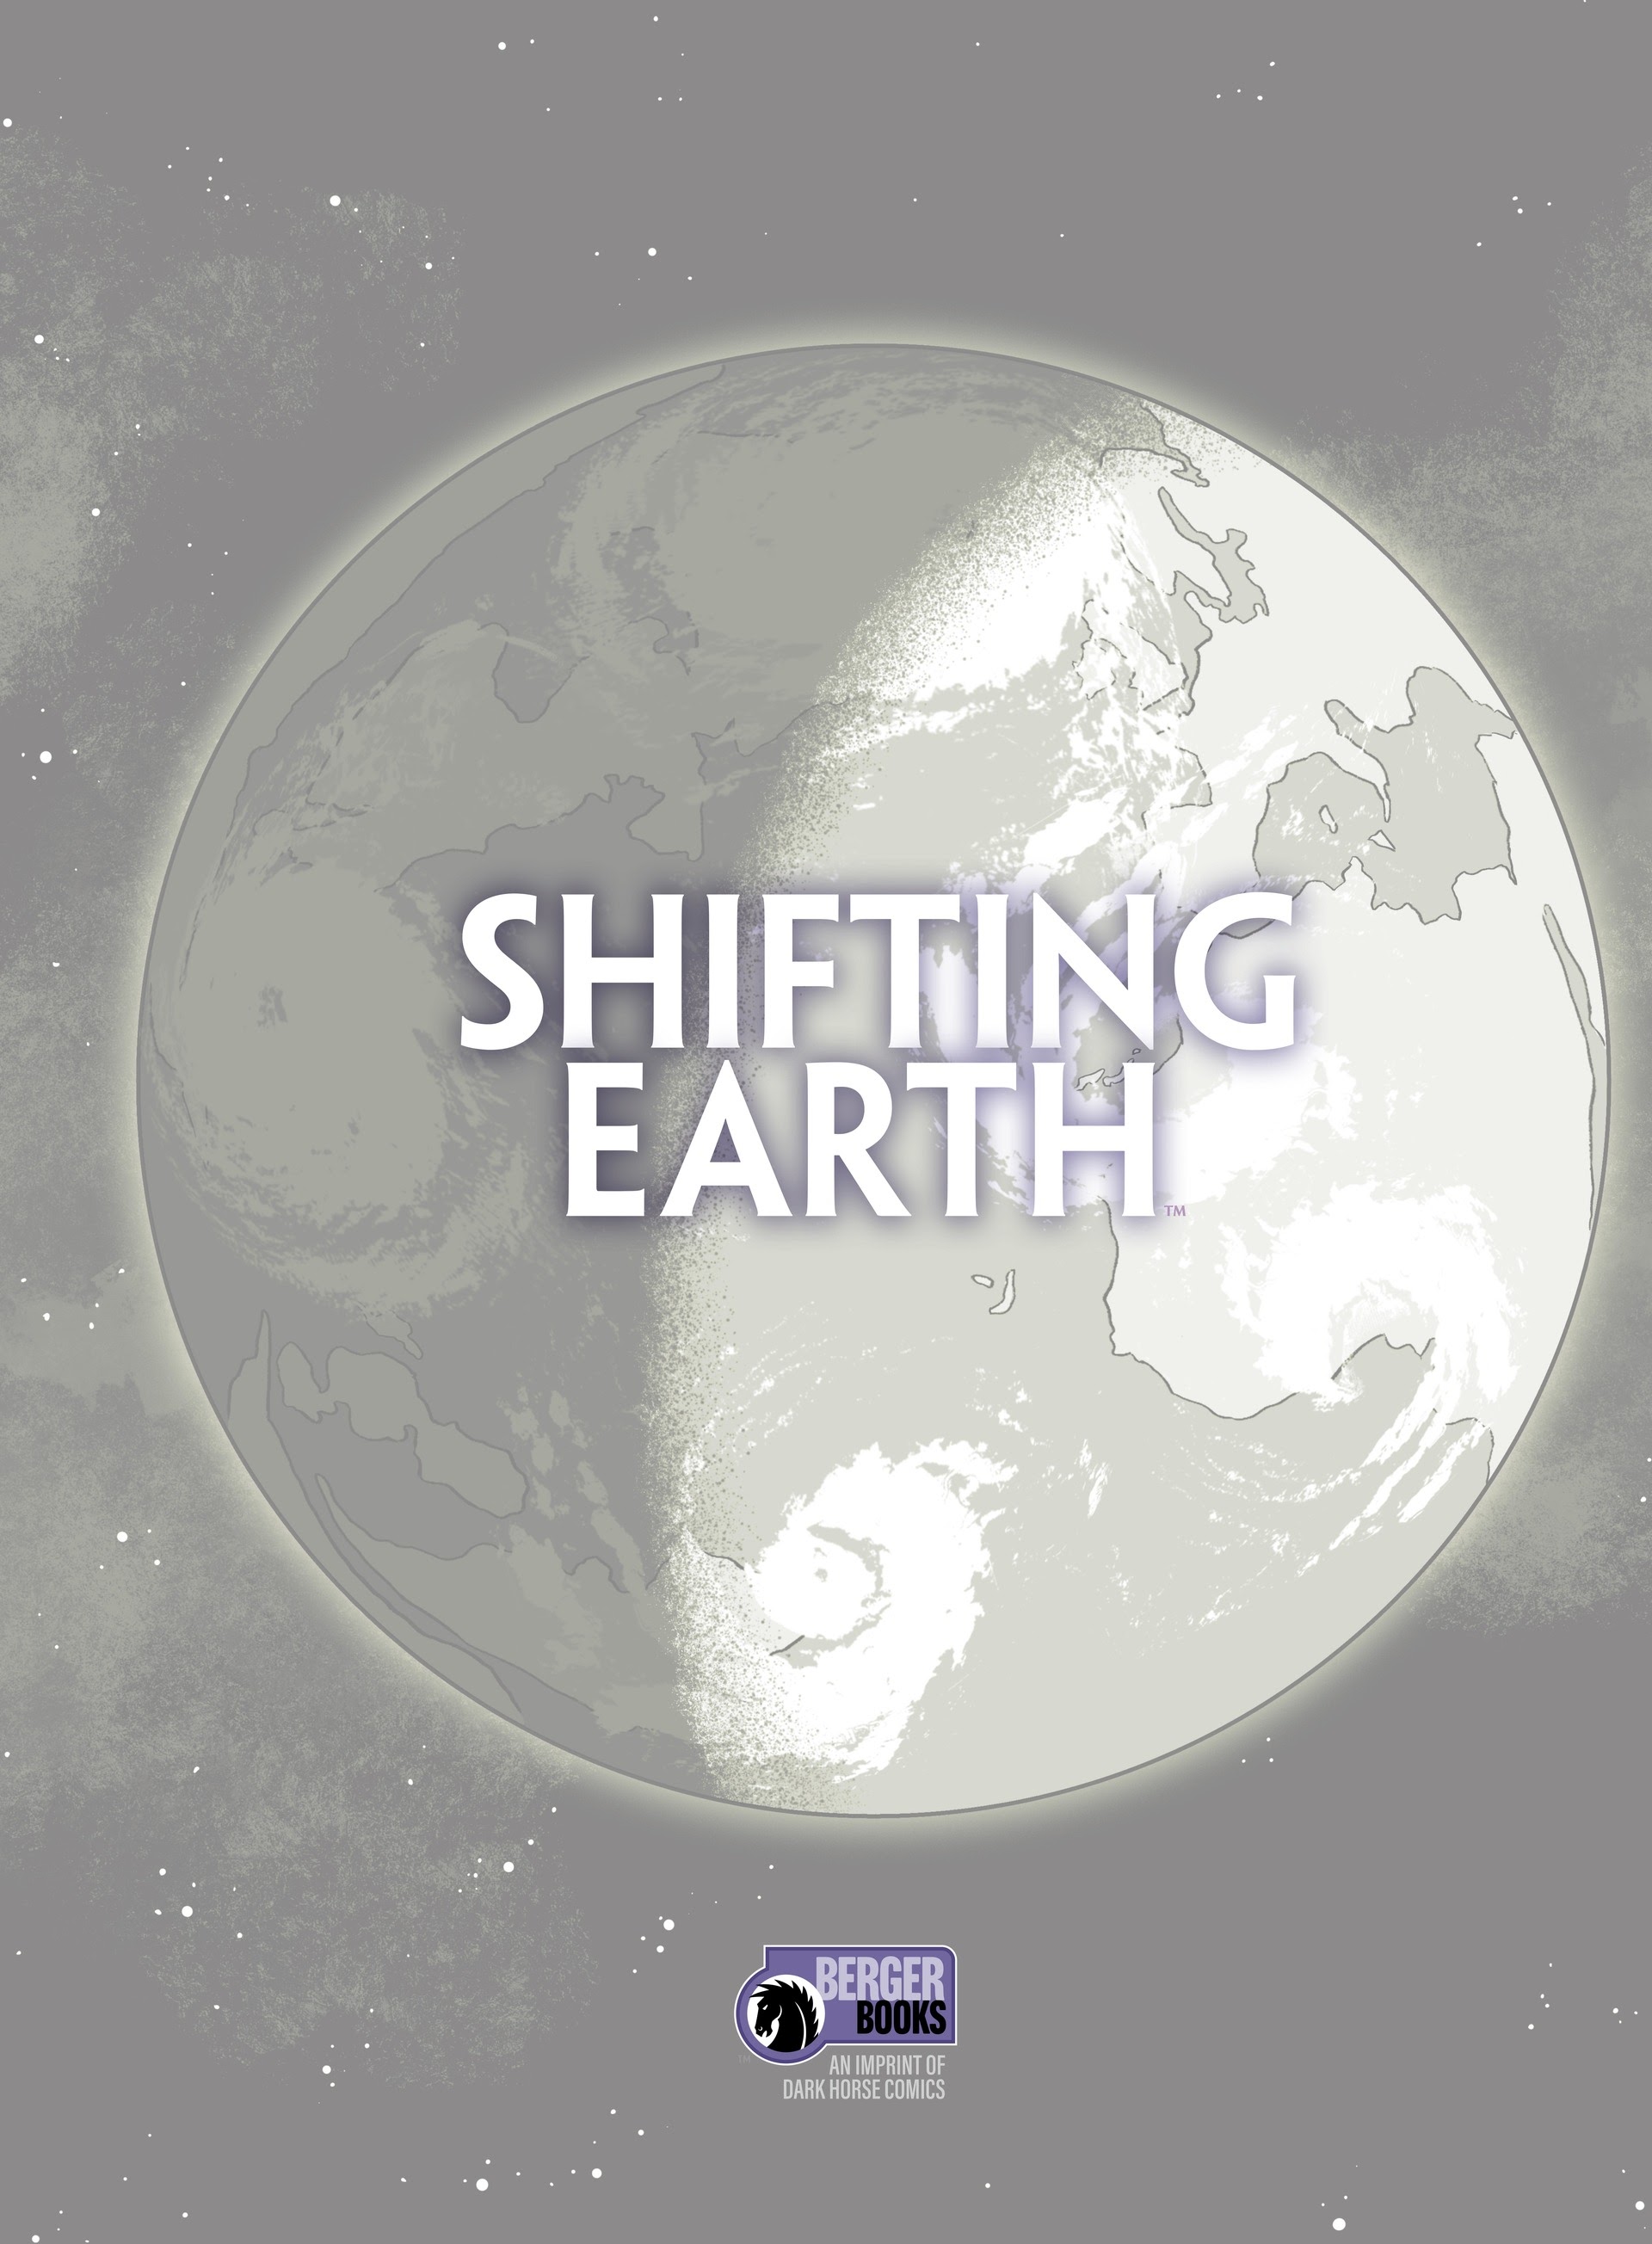 Read online Shifting Earth comic -  Issue # TPB - 3